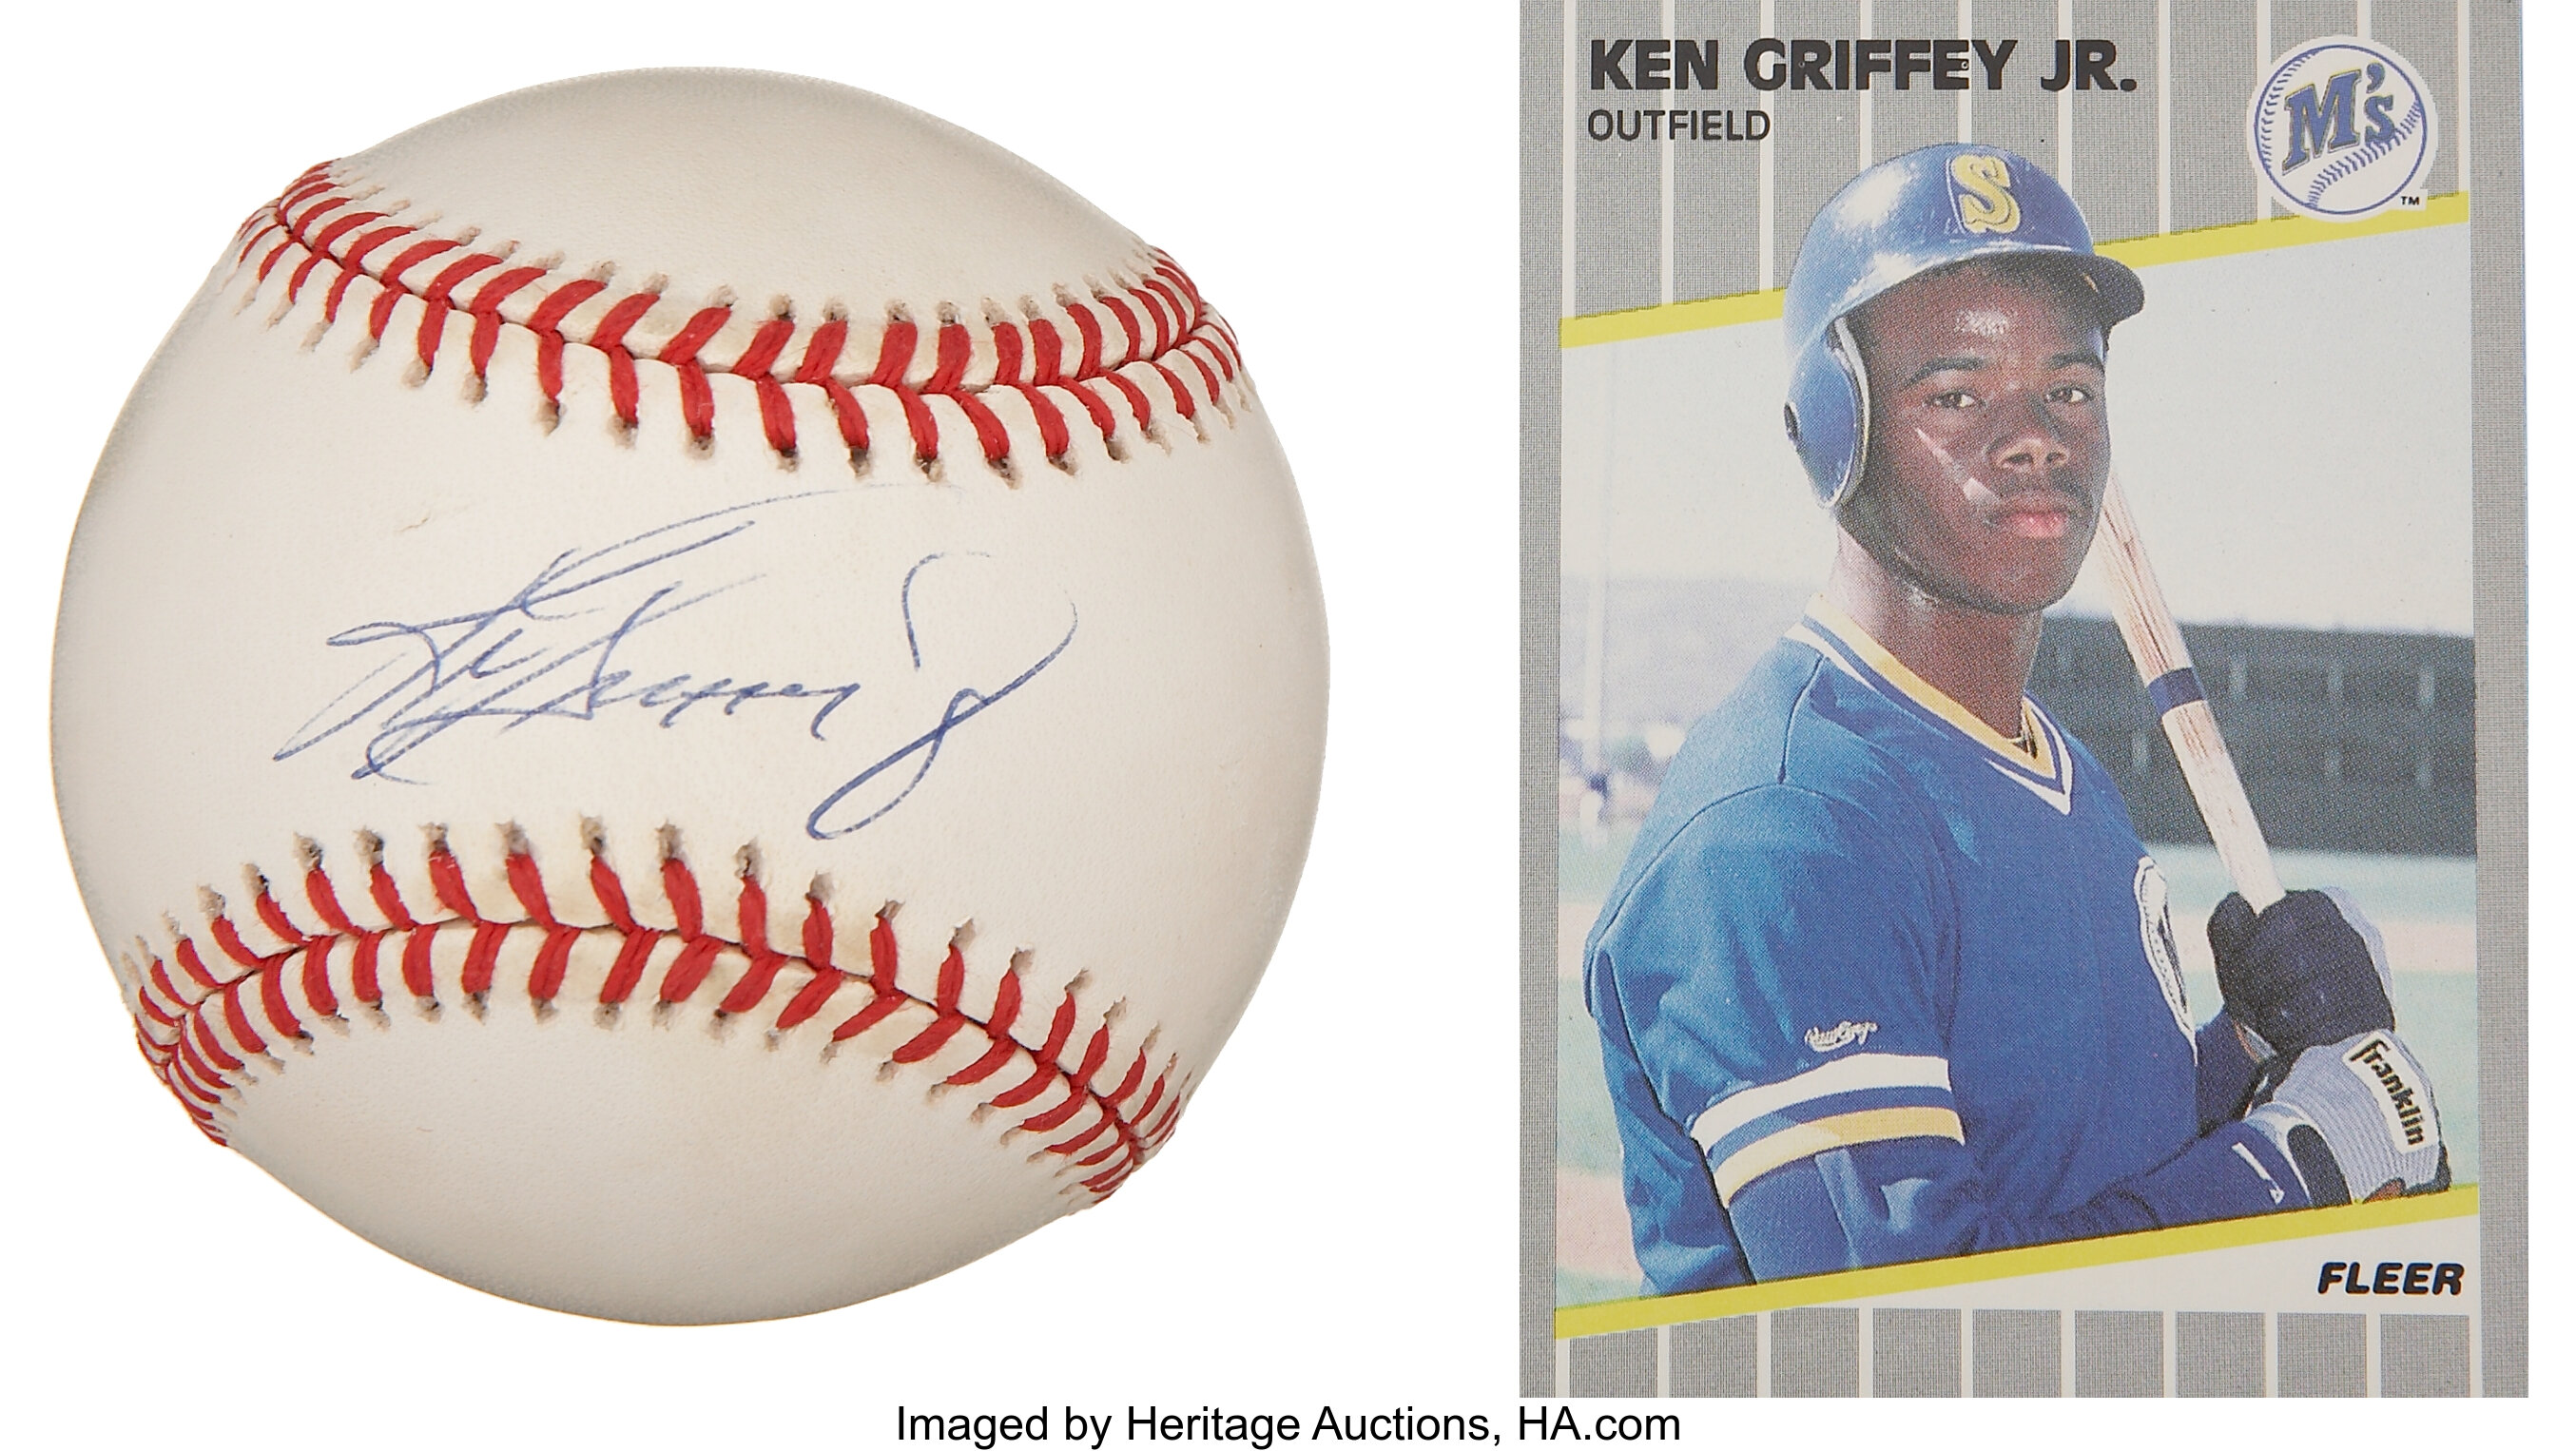 Ken Griffey Jr Single Signed Baseball With Rookie Card Lot 44102 Heritage Auctions